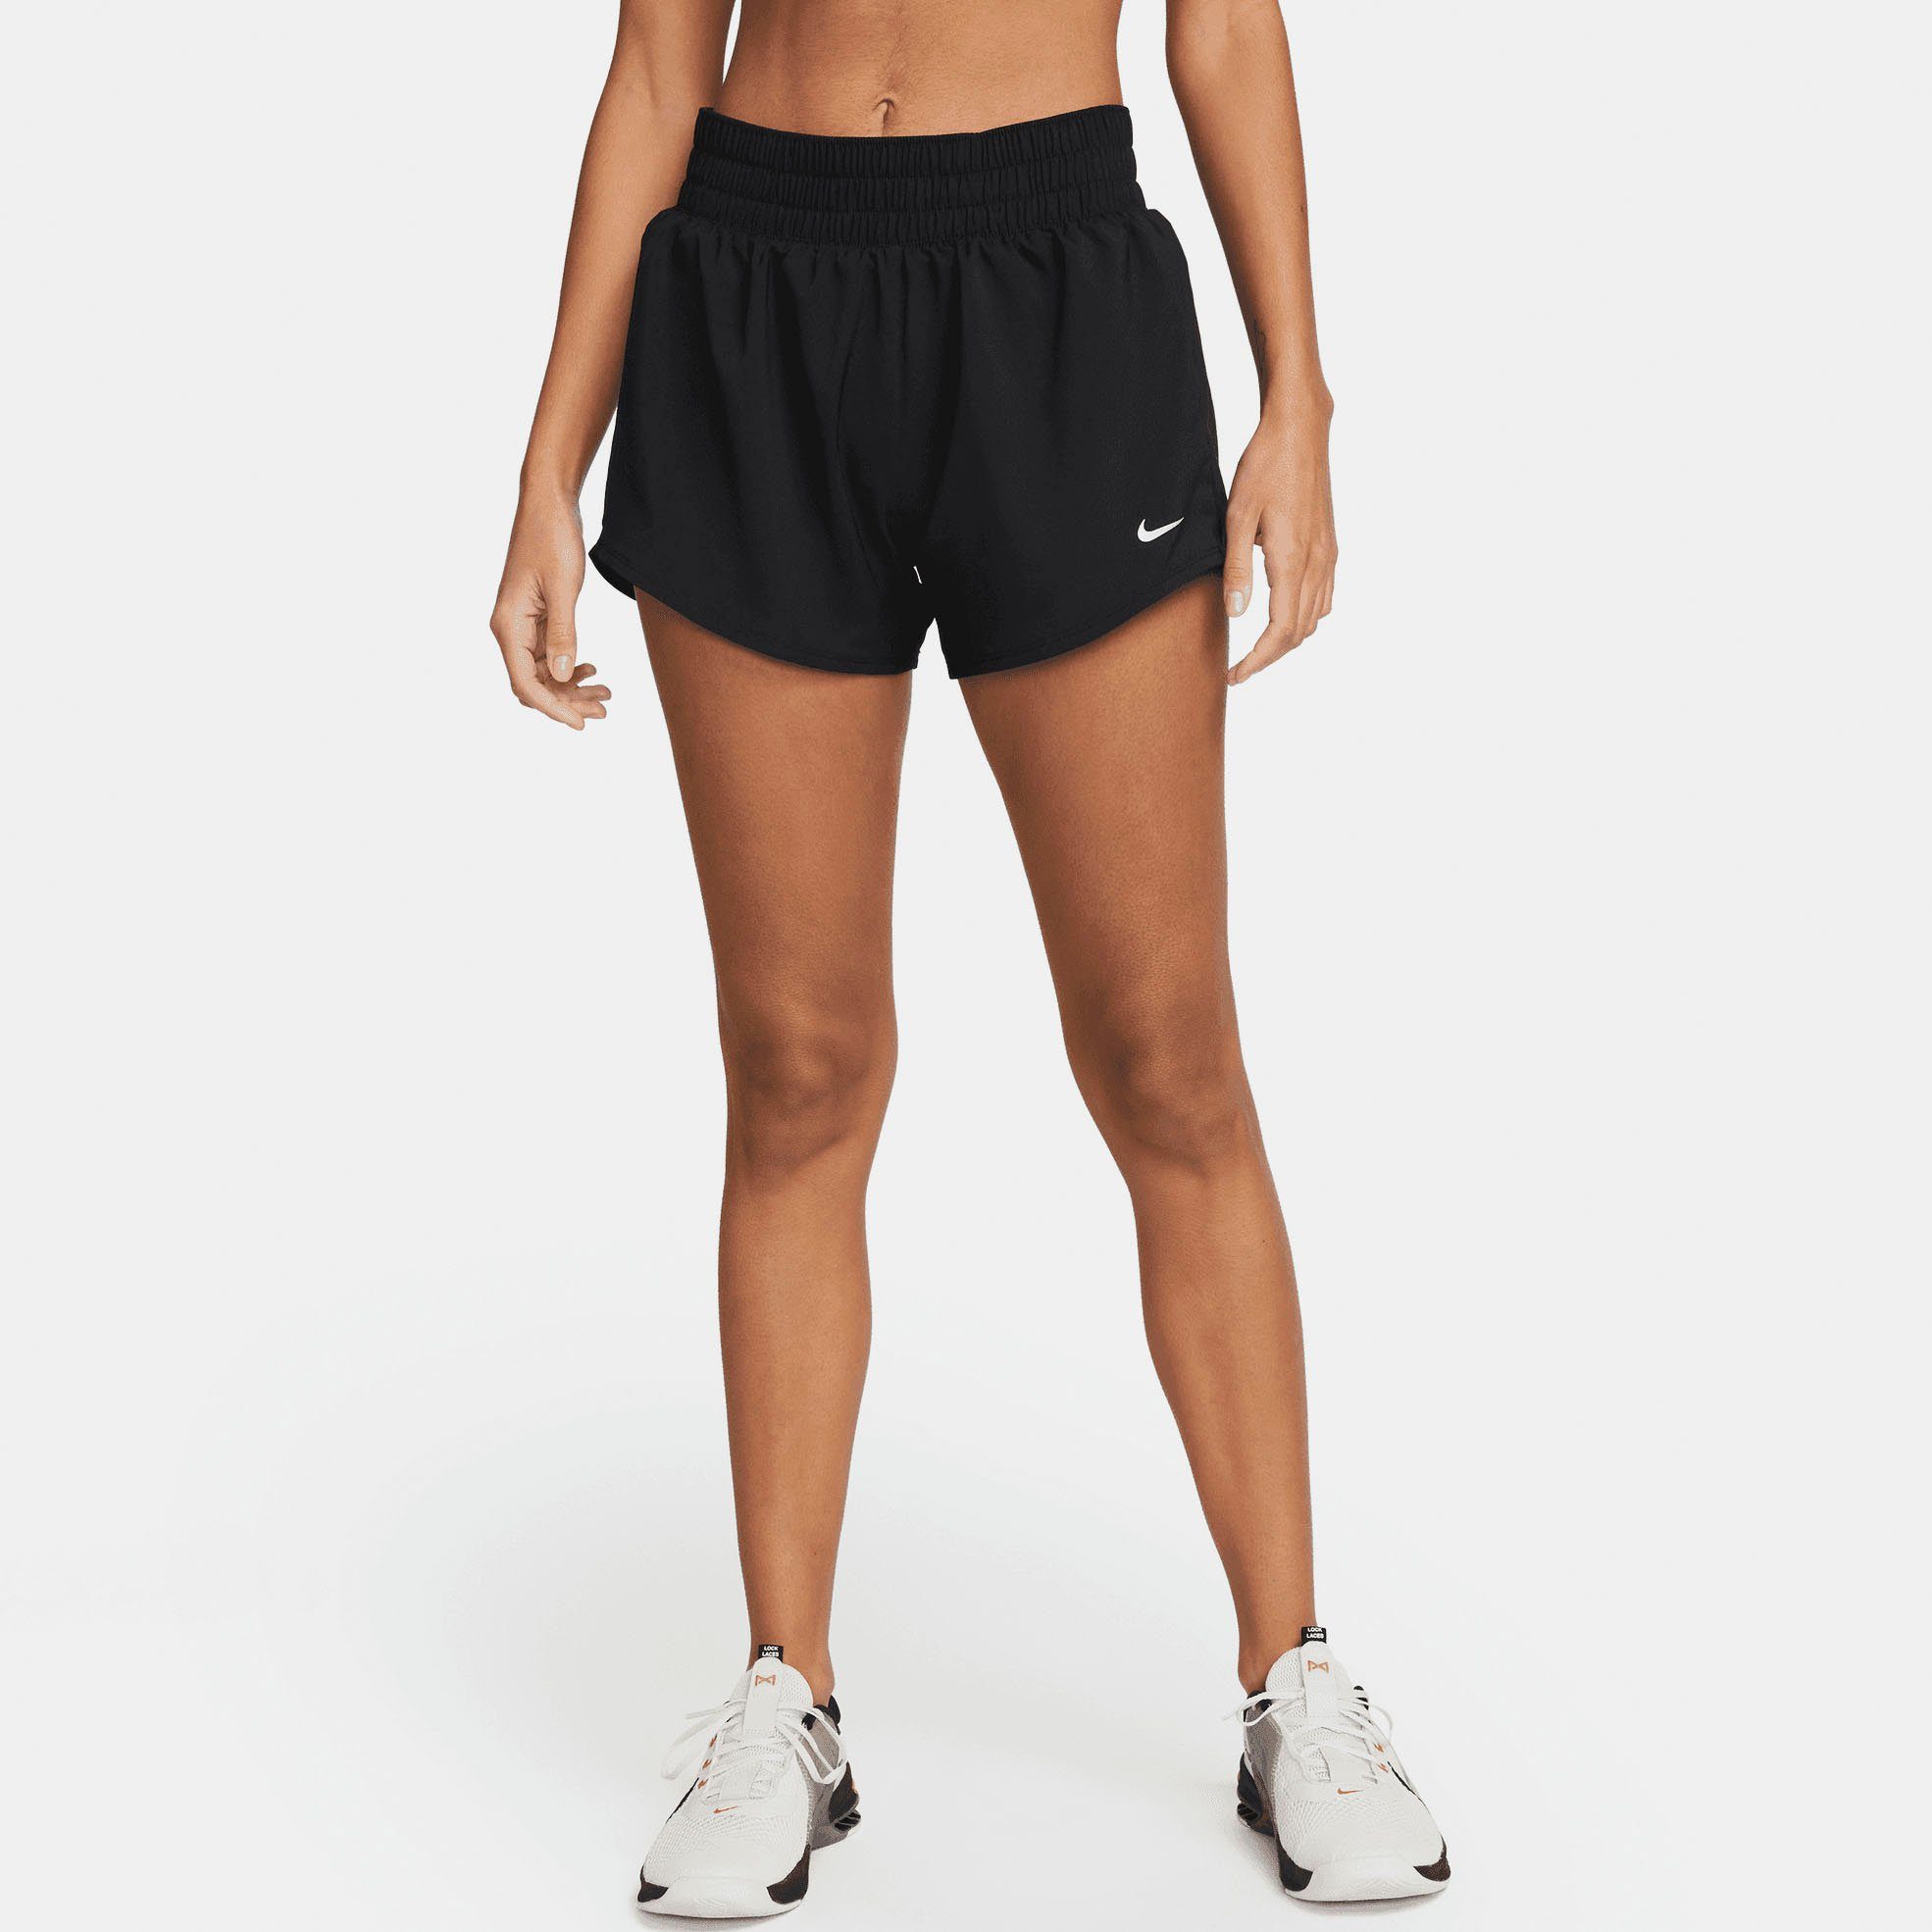 MID-RISE ONE Trainingsshorts SILV SHORTS BLACK/REFLECTIVE DRI-FIT Nike WOMEN'S BRIEF-LINED